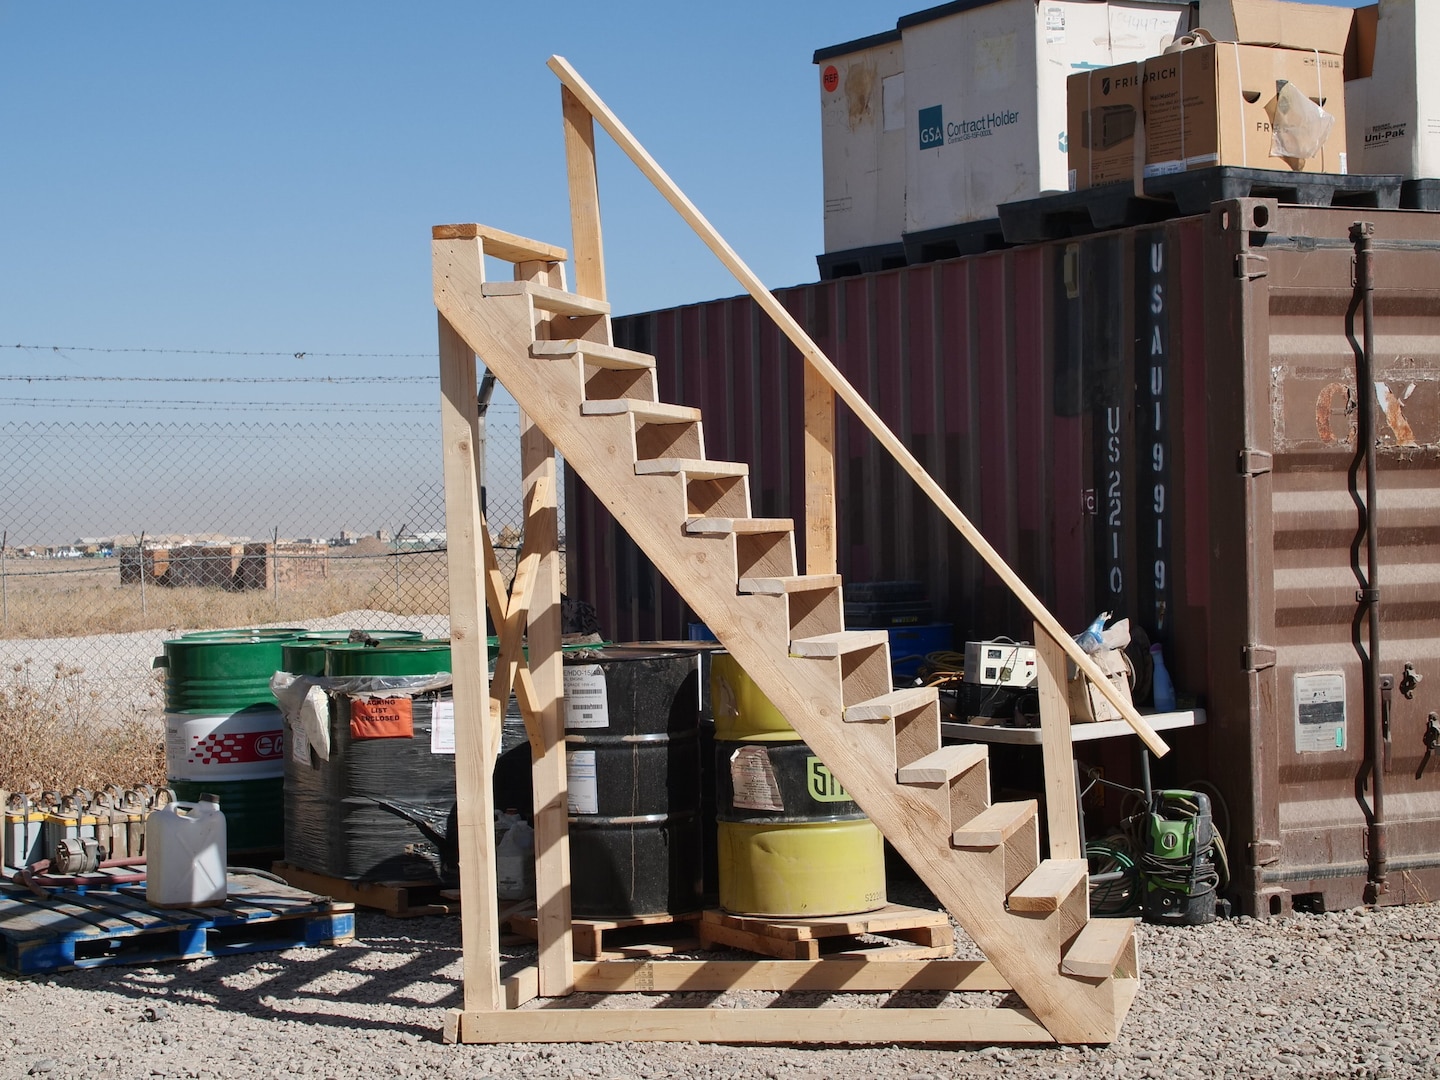 West Virginia Army National Guard Soldiers with the 1022nd Engineer Company have built more than 15 staircases for use by troops across Erbil Air Base in Iraq. The staircases are placed in some of the most highly traveled areas, enabling Soldiers to get to elevated platforms safer and more efficiently.